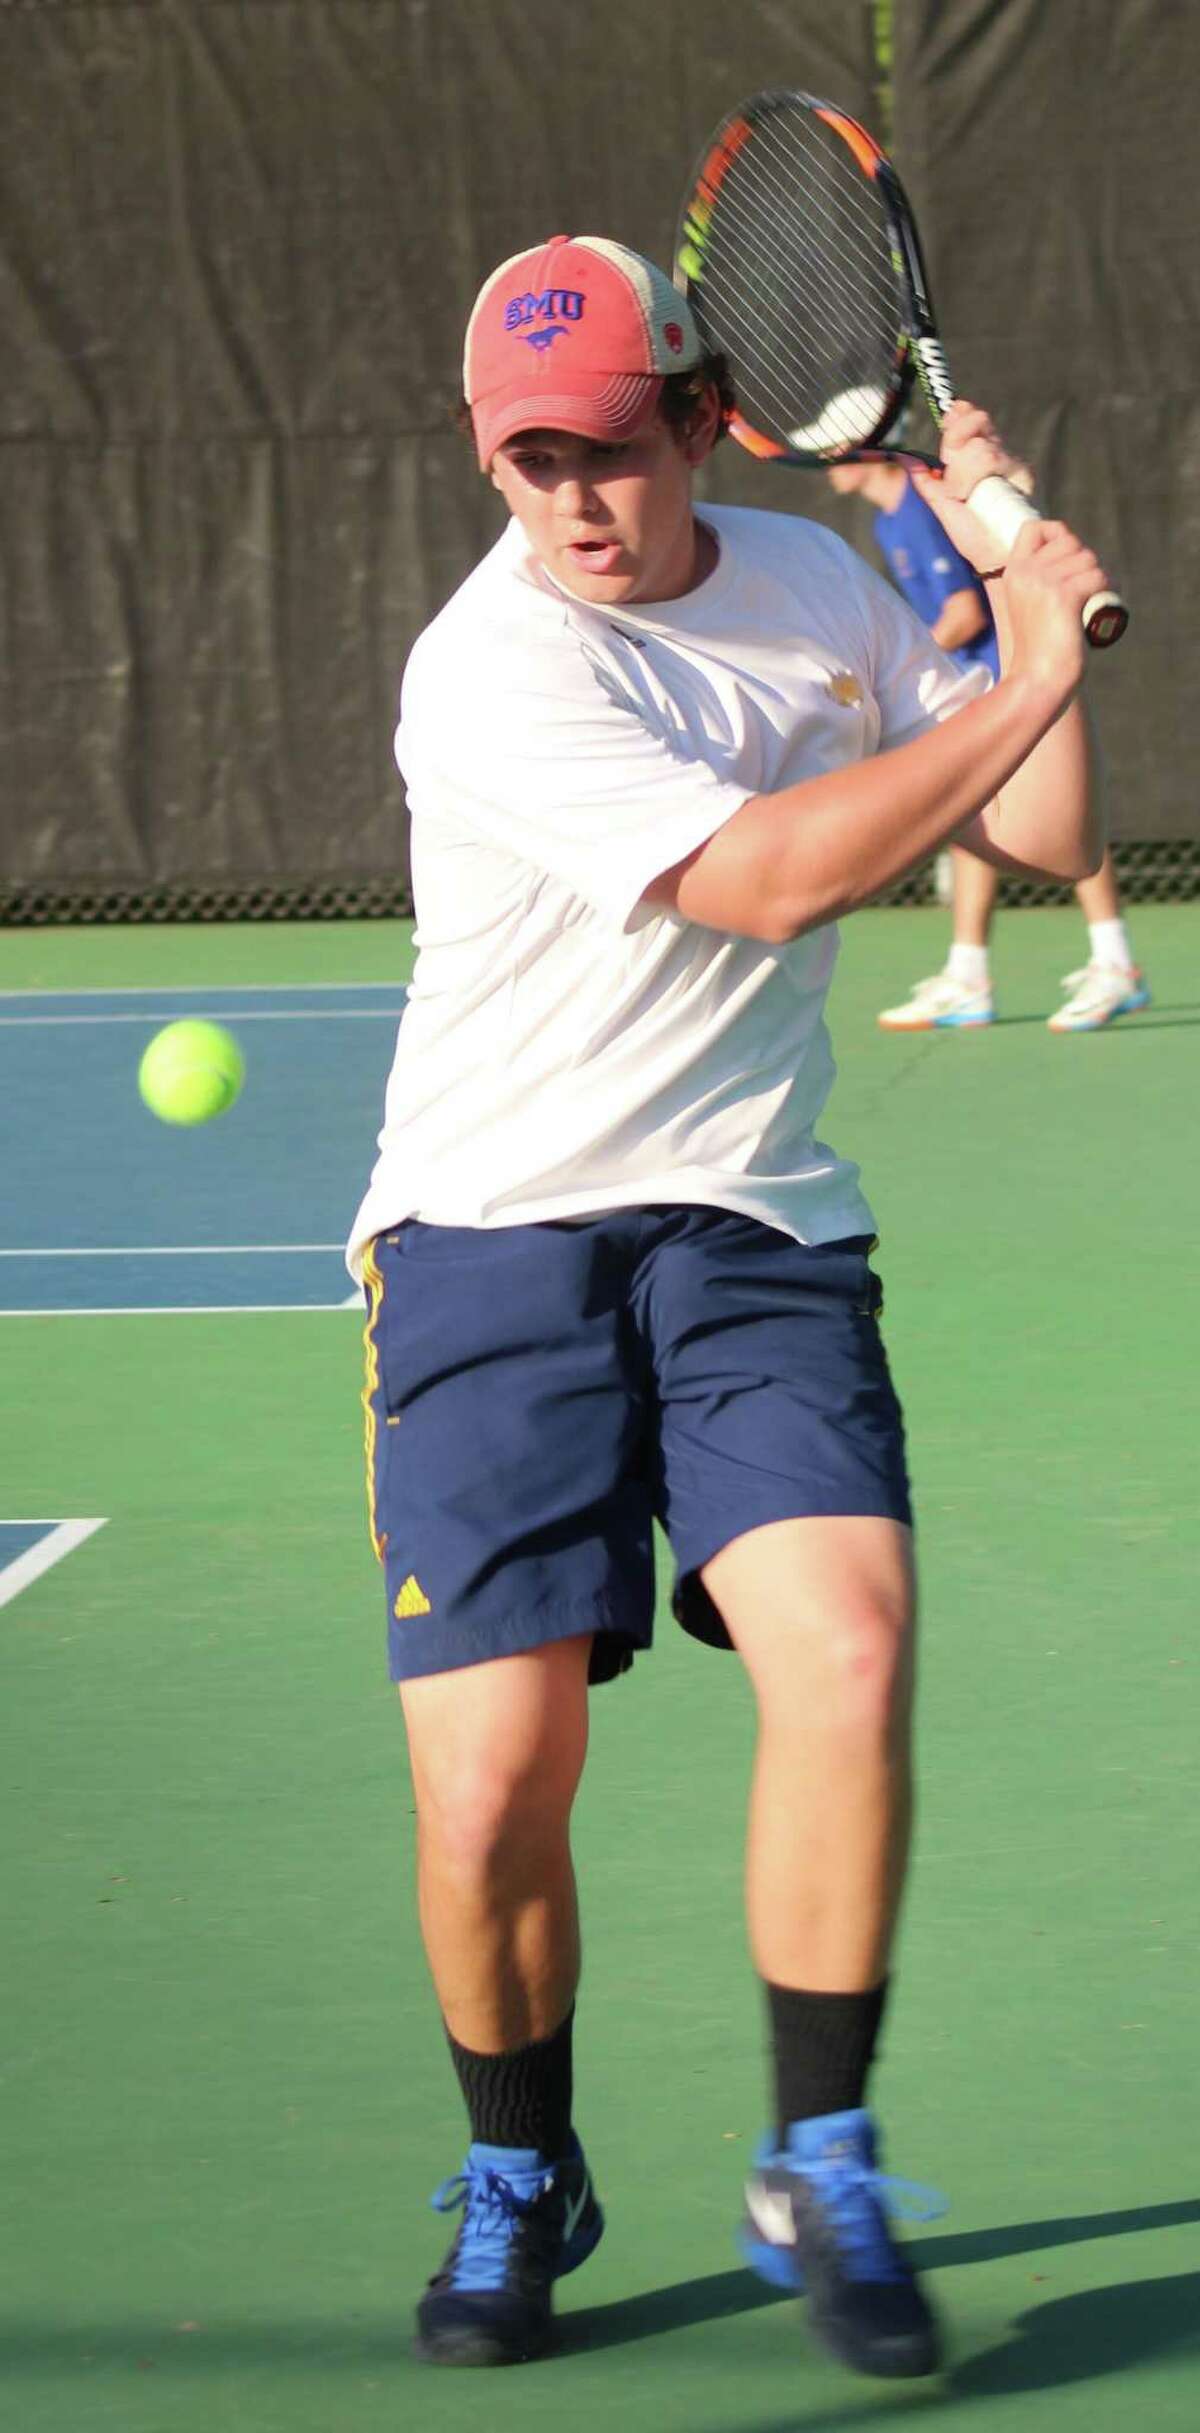 Weston's Sebastian Casellas won a three-set battle at No. 1 singles to help lead the Weston High School boys tennis team to a 6-1 victory over Newtown in the South-West Conference team championship at Weston High School May 17, 2017.